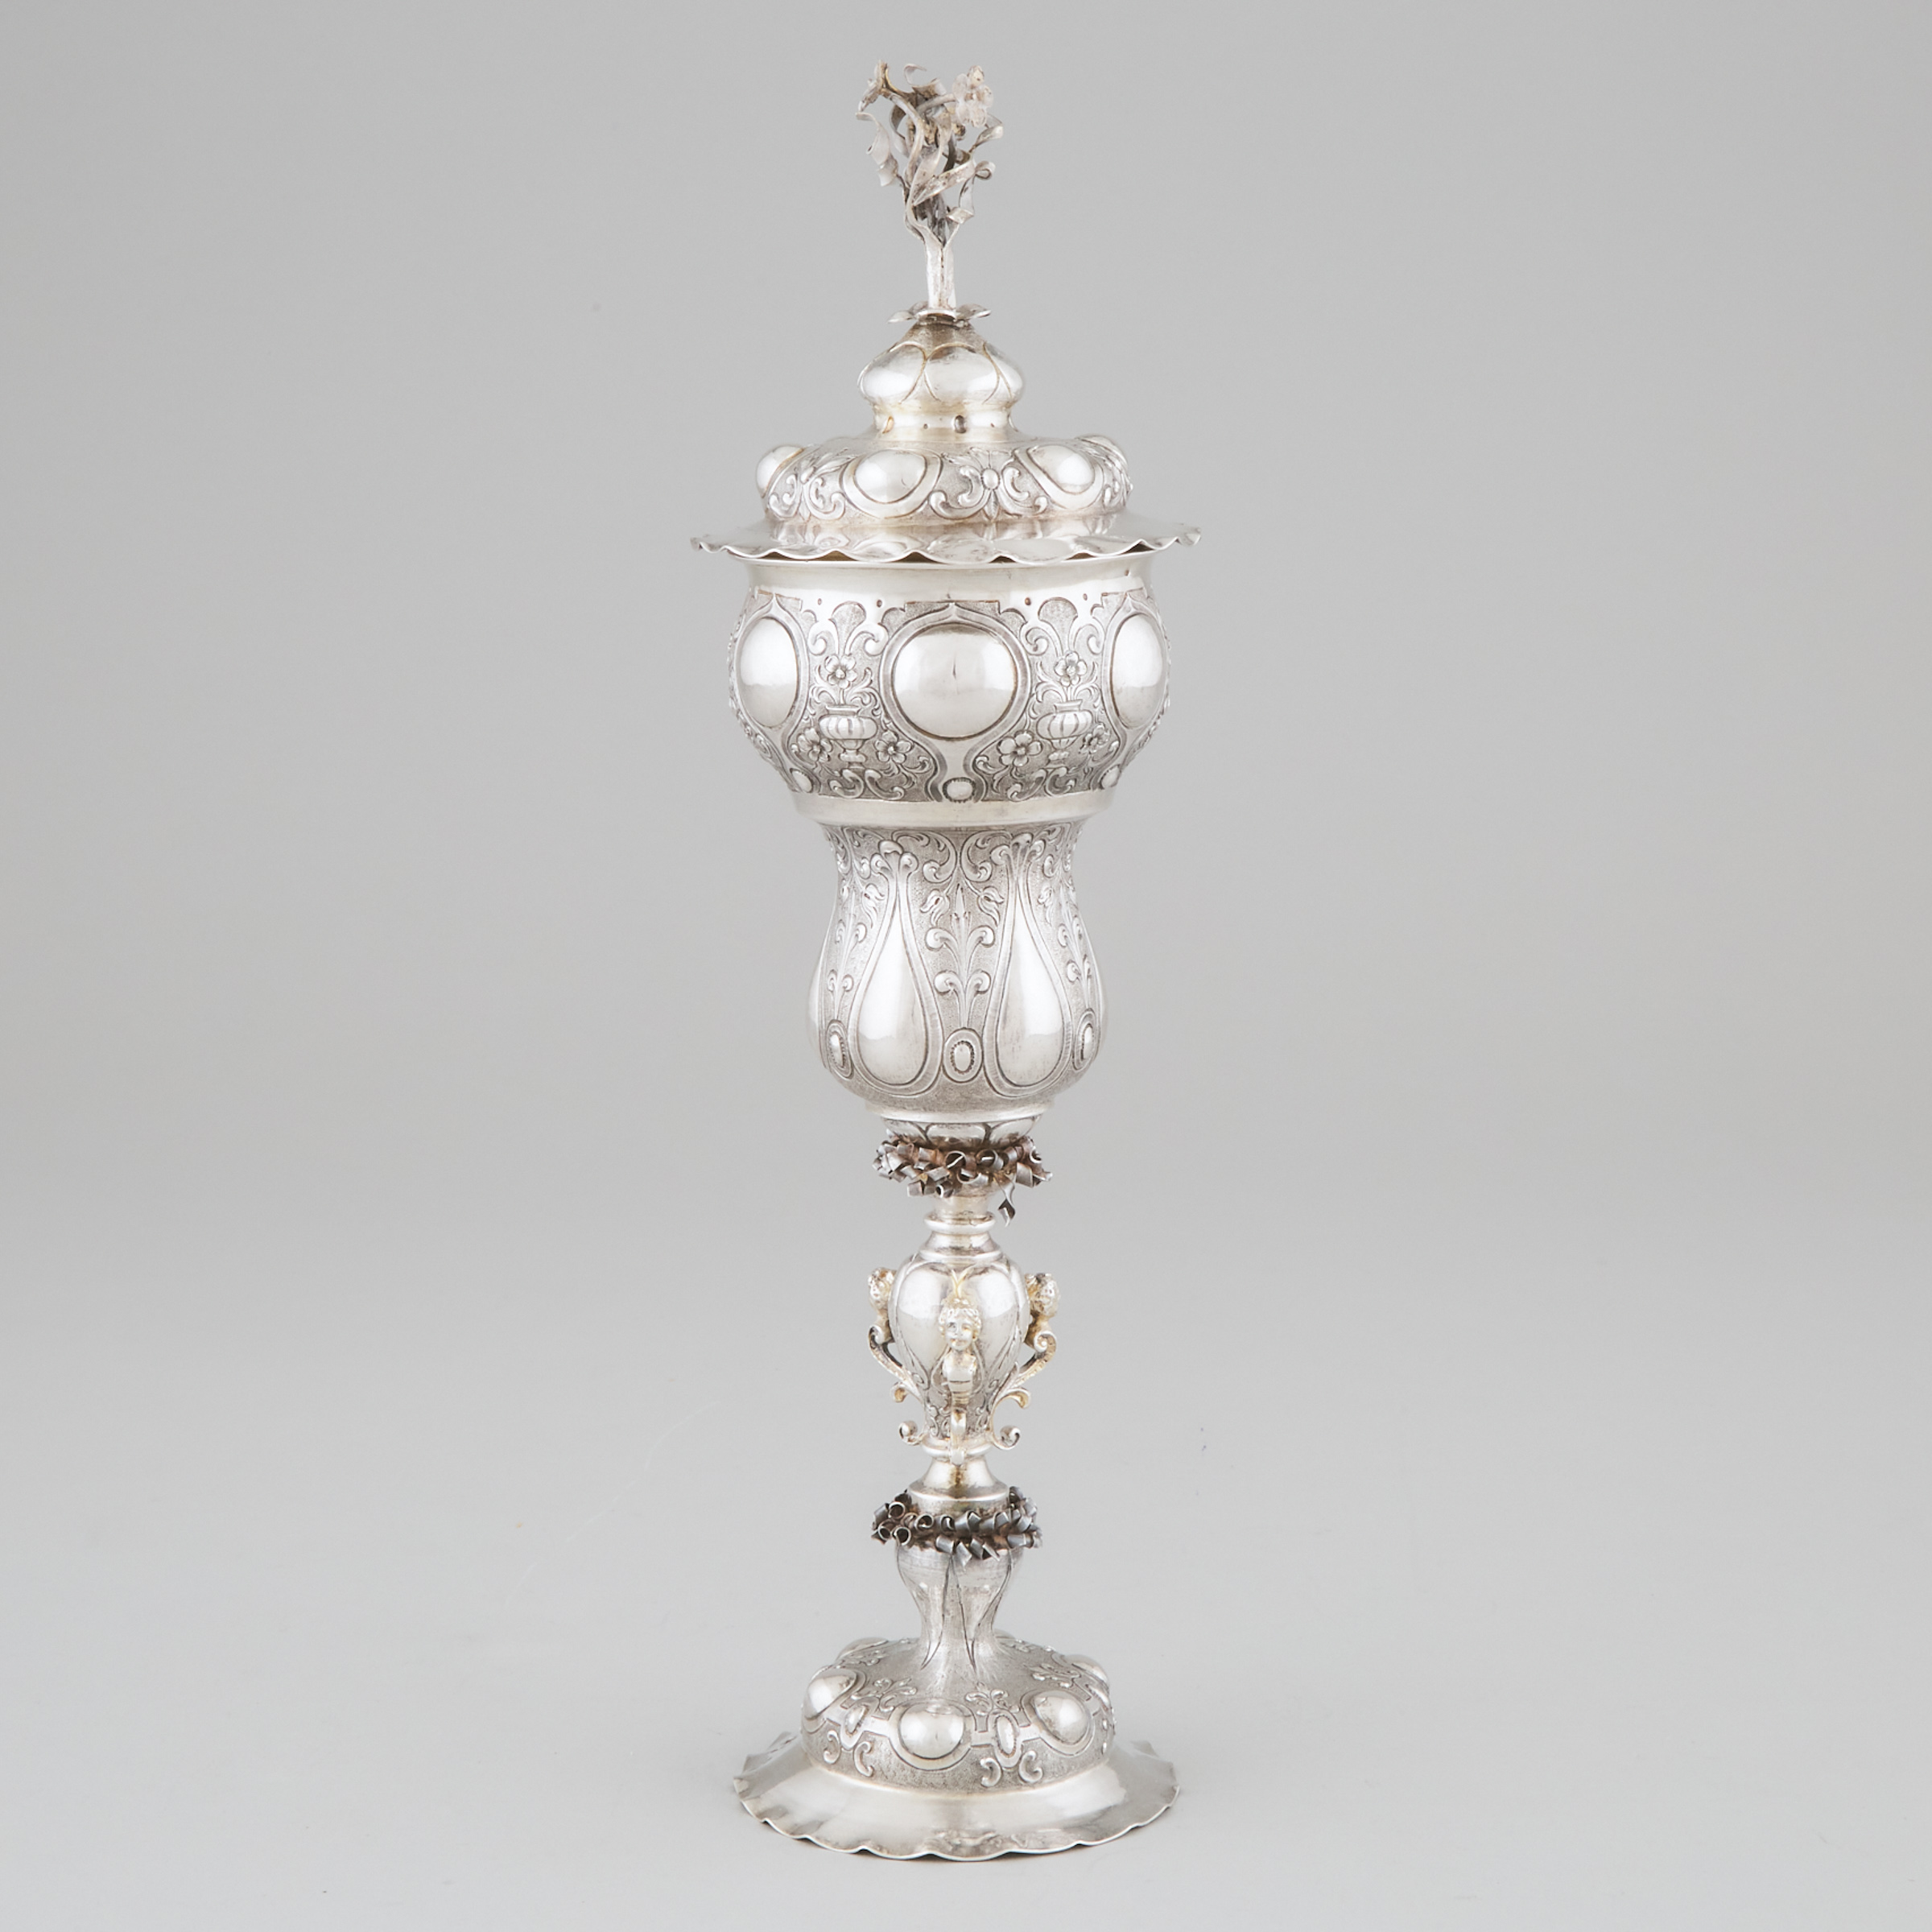 German Silver Standing Cup and Cover, probably Gebrüder Gutgesell, Hanau, late 19th century